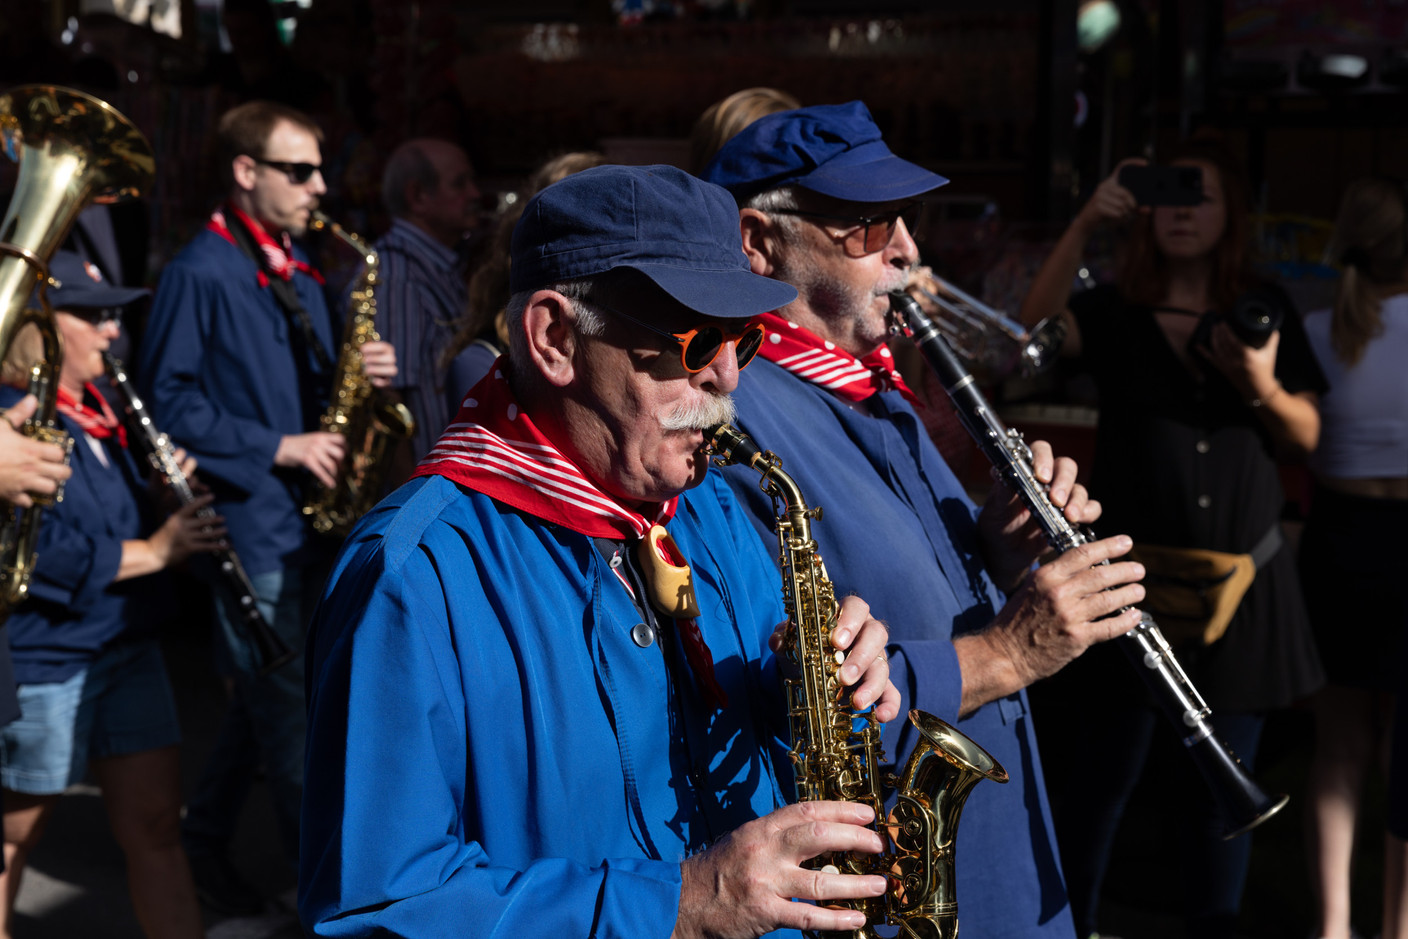 The Hämmelsmarsch is also a parade of musicians dressed in blue jackets and red scarves.  Photo: Romain Gamba/Maison Moderne